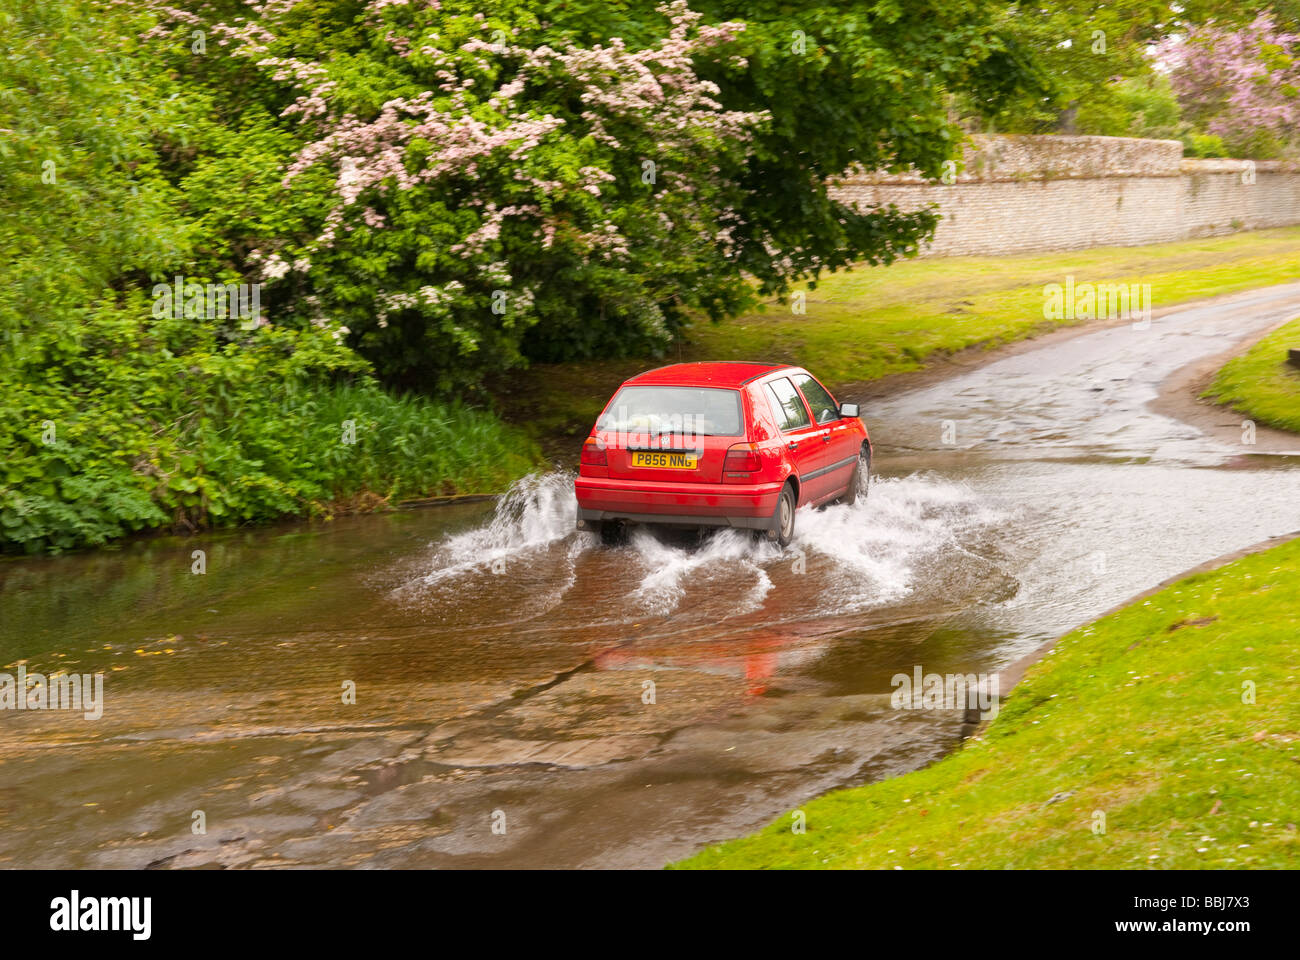 A car driving through a ford running across a country lane in the Uk countryside Stock Photo